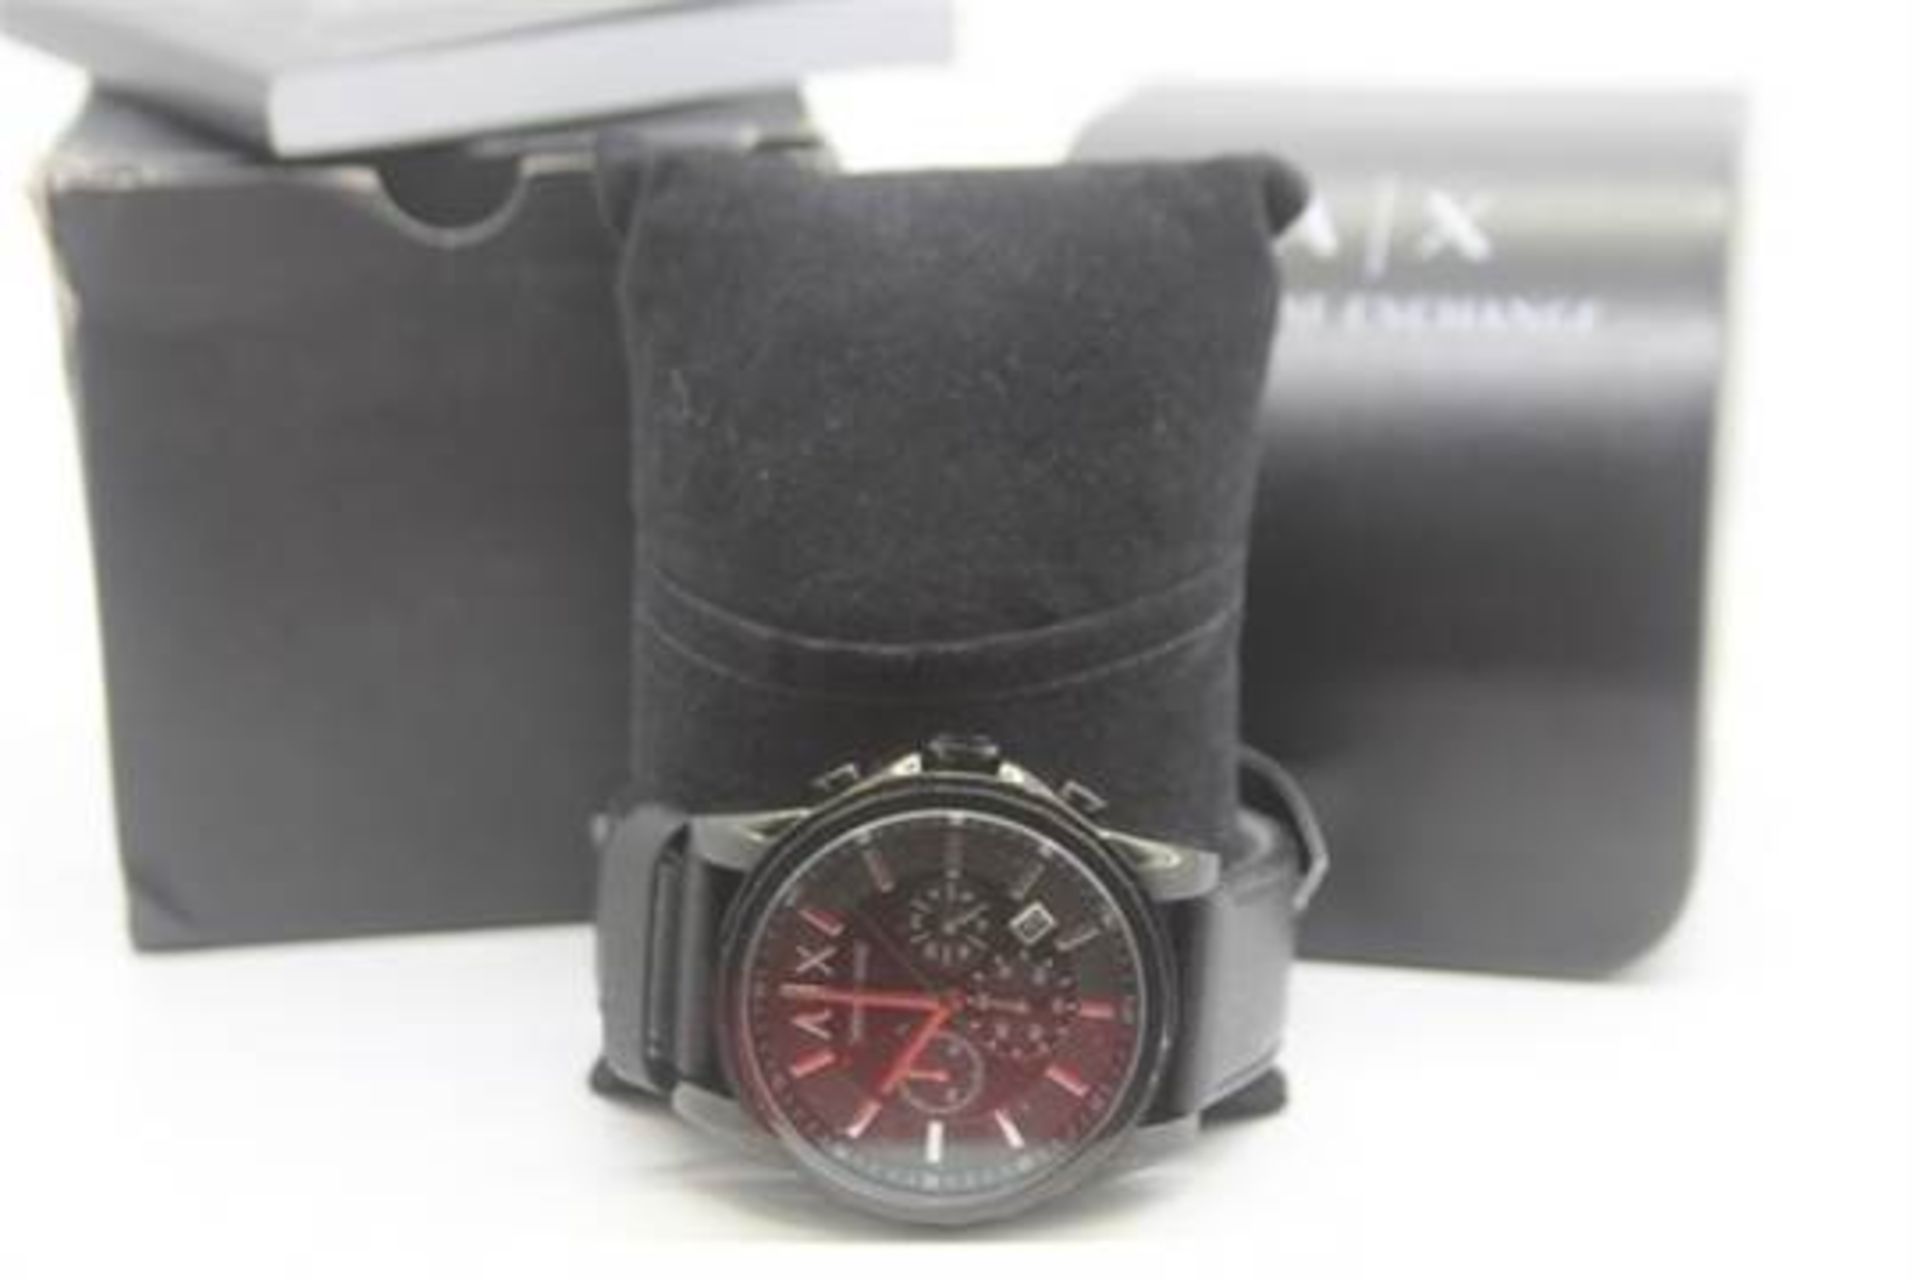 BOXED ARMANI EXCHANGE GENTS BLACK LEATHER WRIST WATCH RRP £225 (ADC-9100426)(10.04.16)